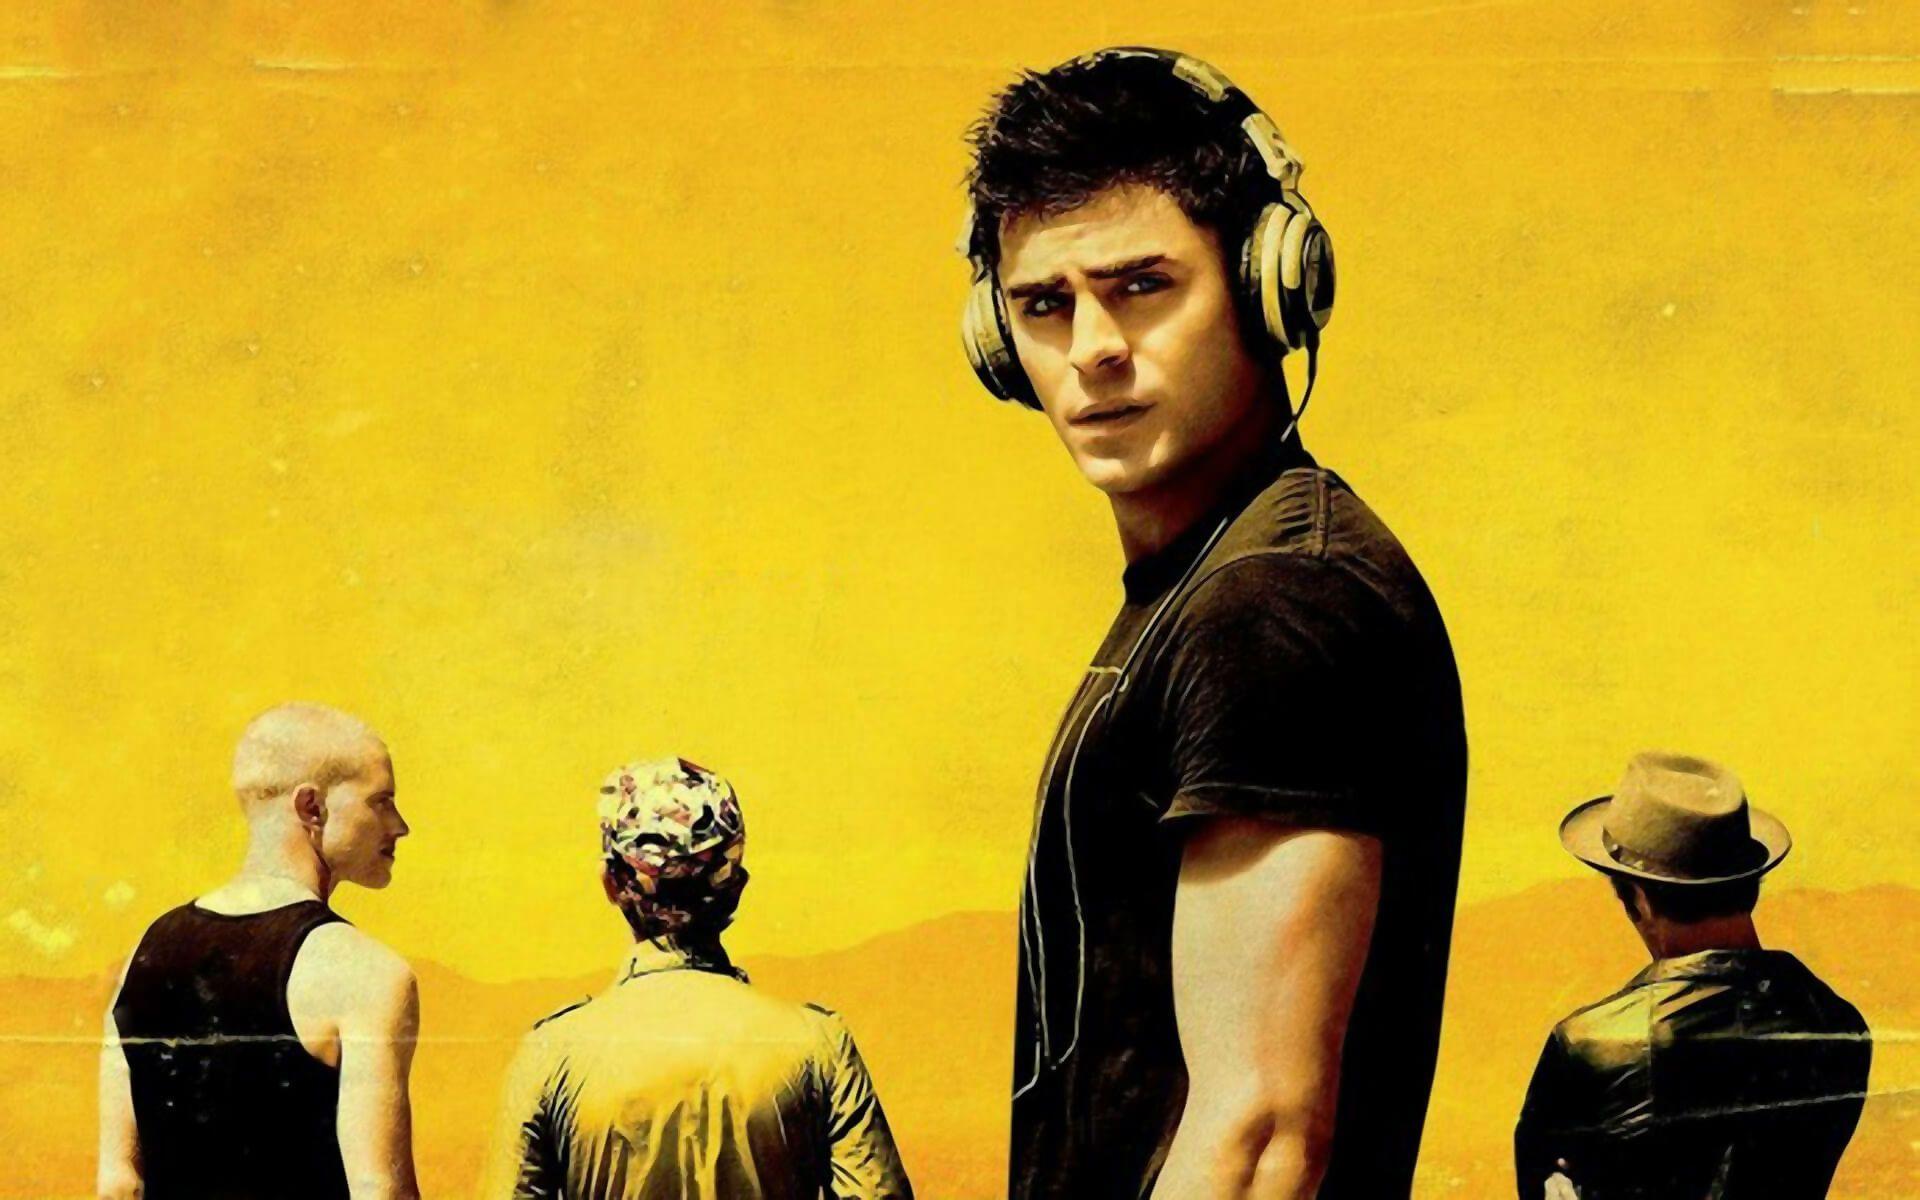 Download Wallpaper 1920x1200 We are your friends, Zac efron, Cole